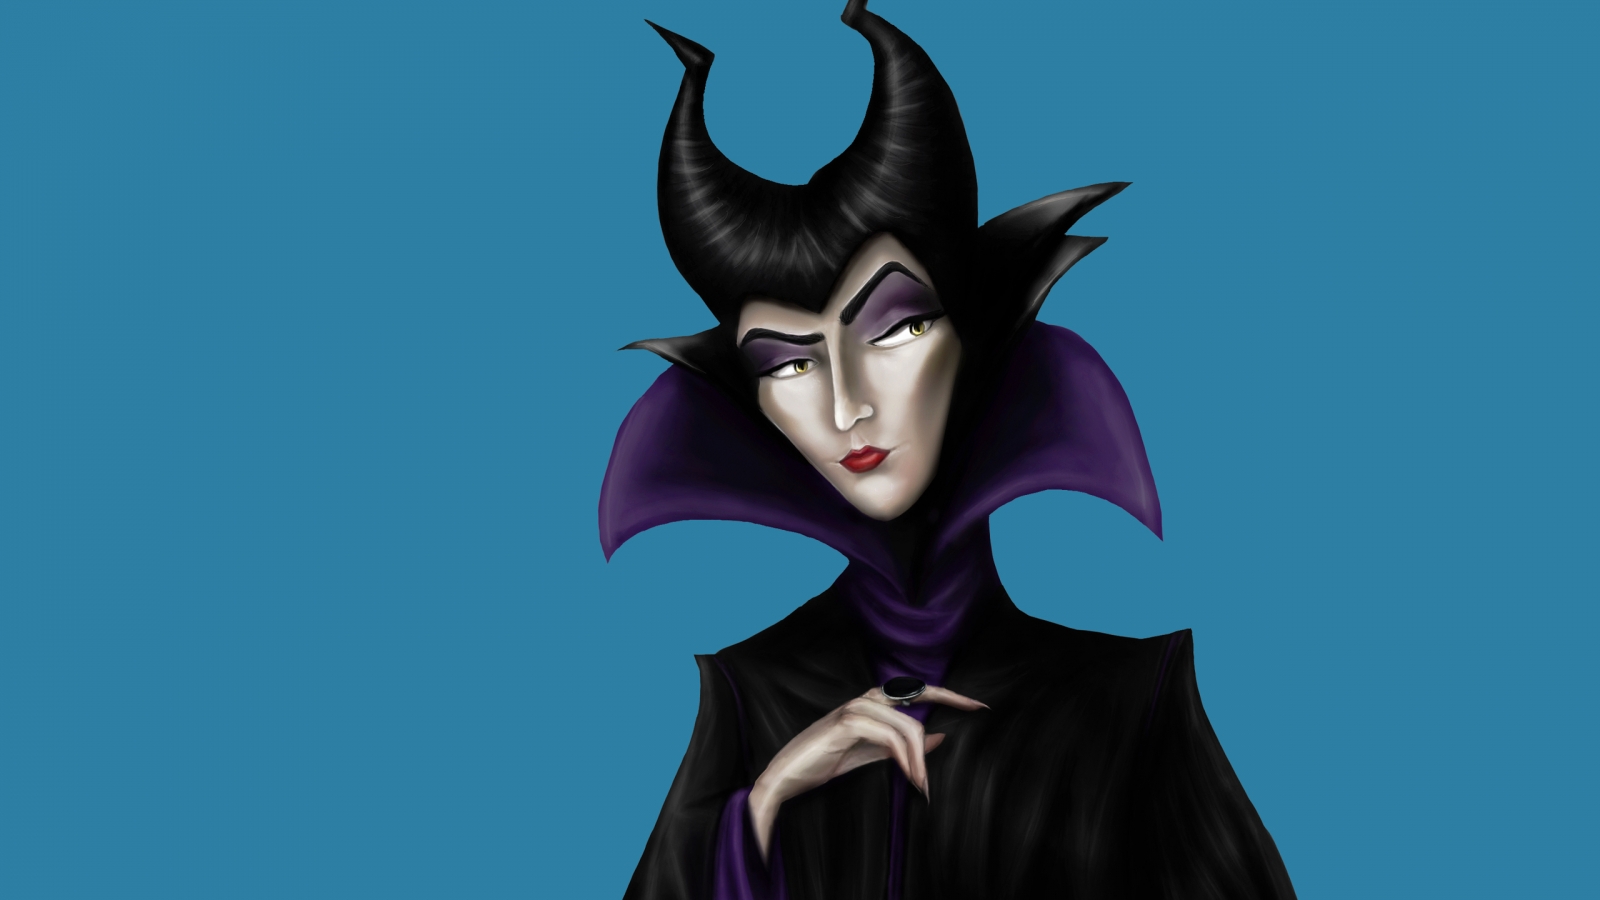 Maleficent Drawing for 1600 x 900 HDTV resolution